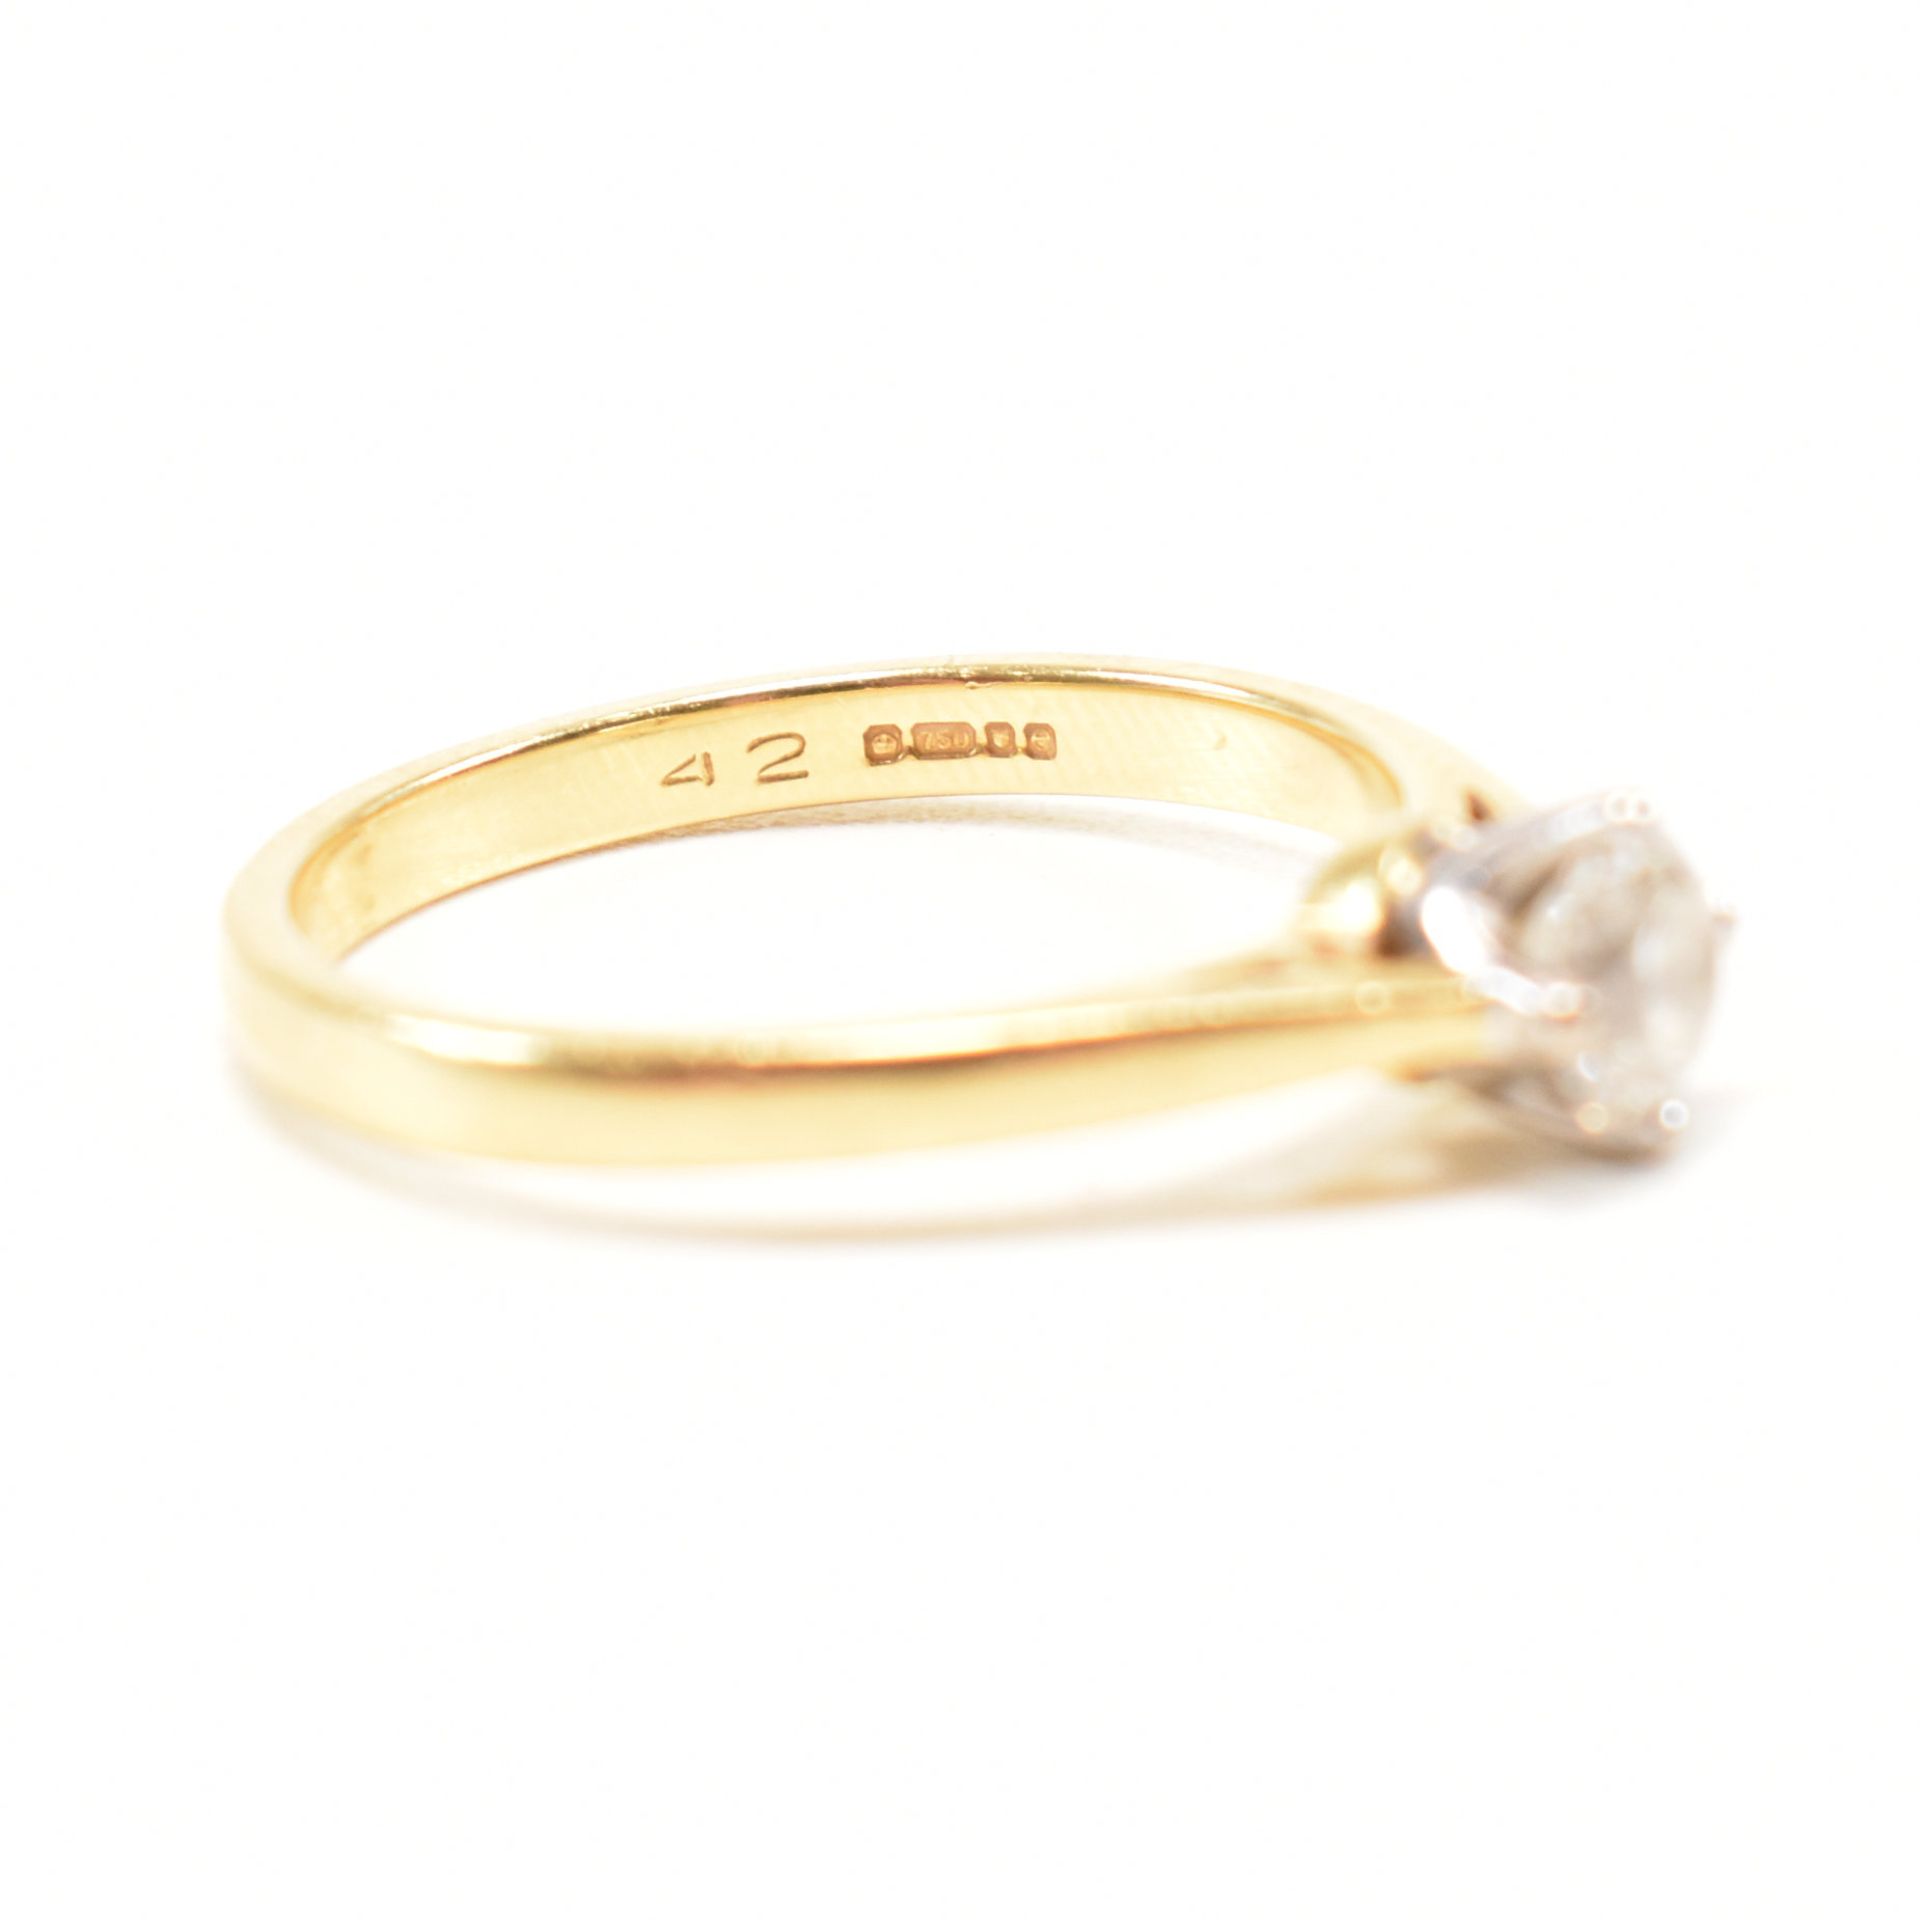 HALLMARKED 9CT GOLD & DIAMOND SOLITAIRE RING - Image 4 of 8